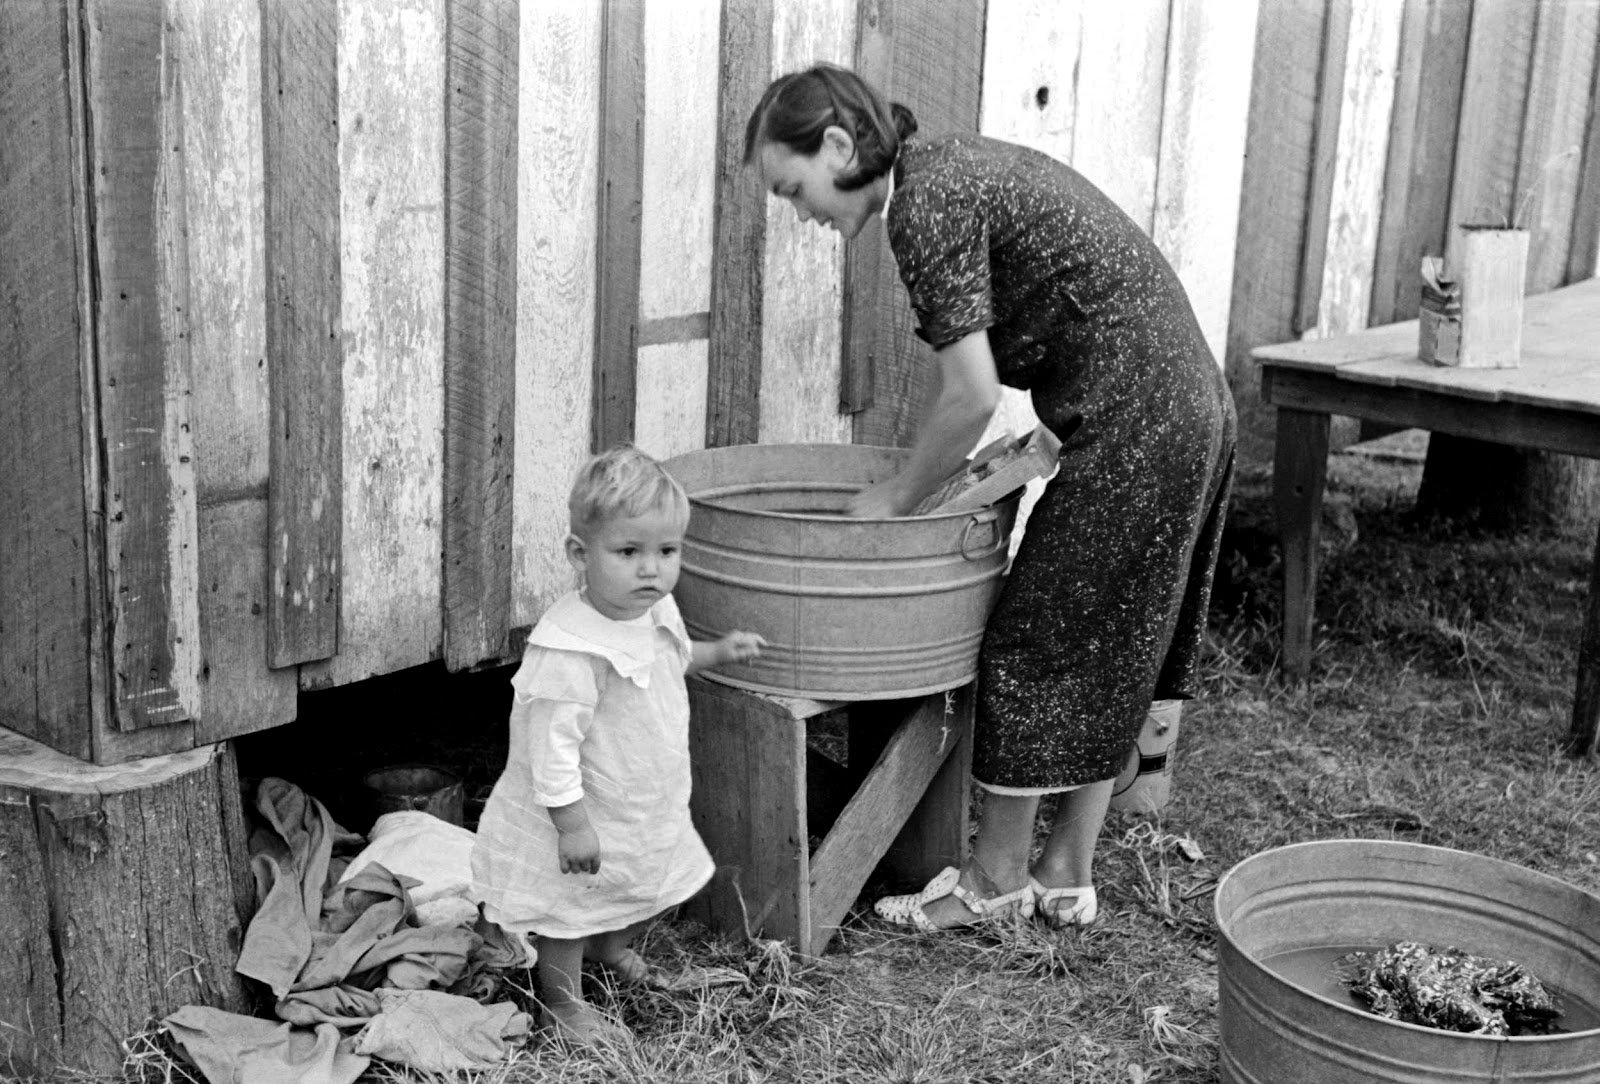 Russell+Lee+-+Farmer%27s+wife+washing+clothes+and+watching+son+at+same+time,+near+Morganza,+Louisiana,+1938.jpg